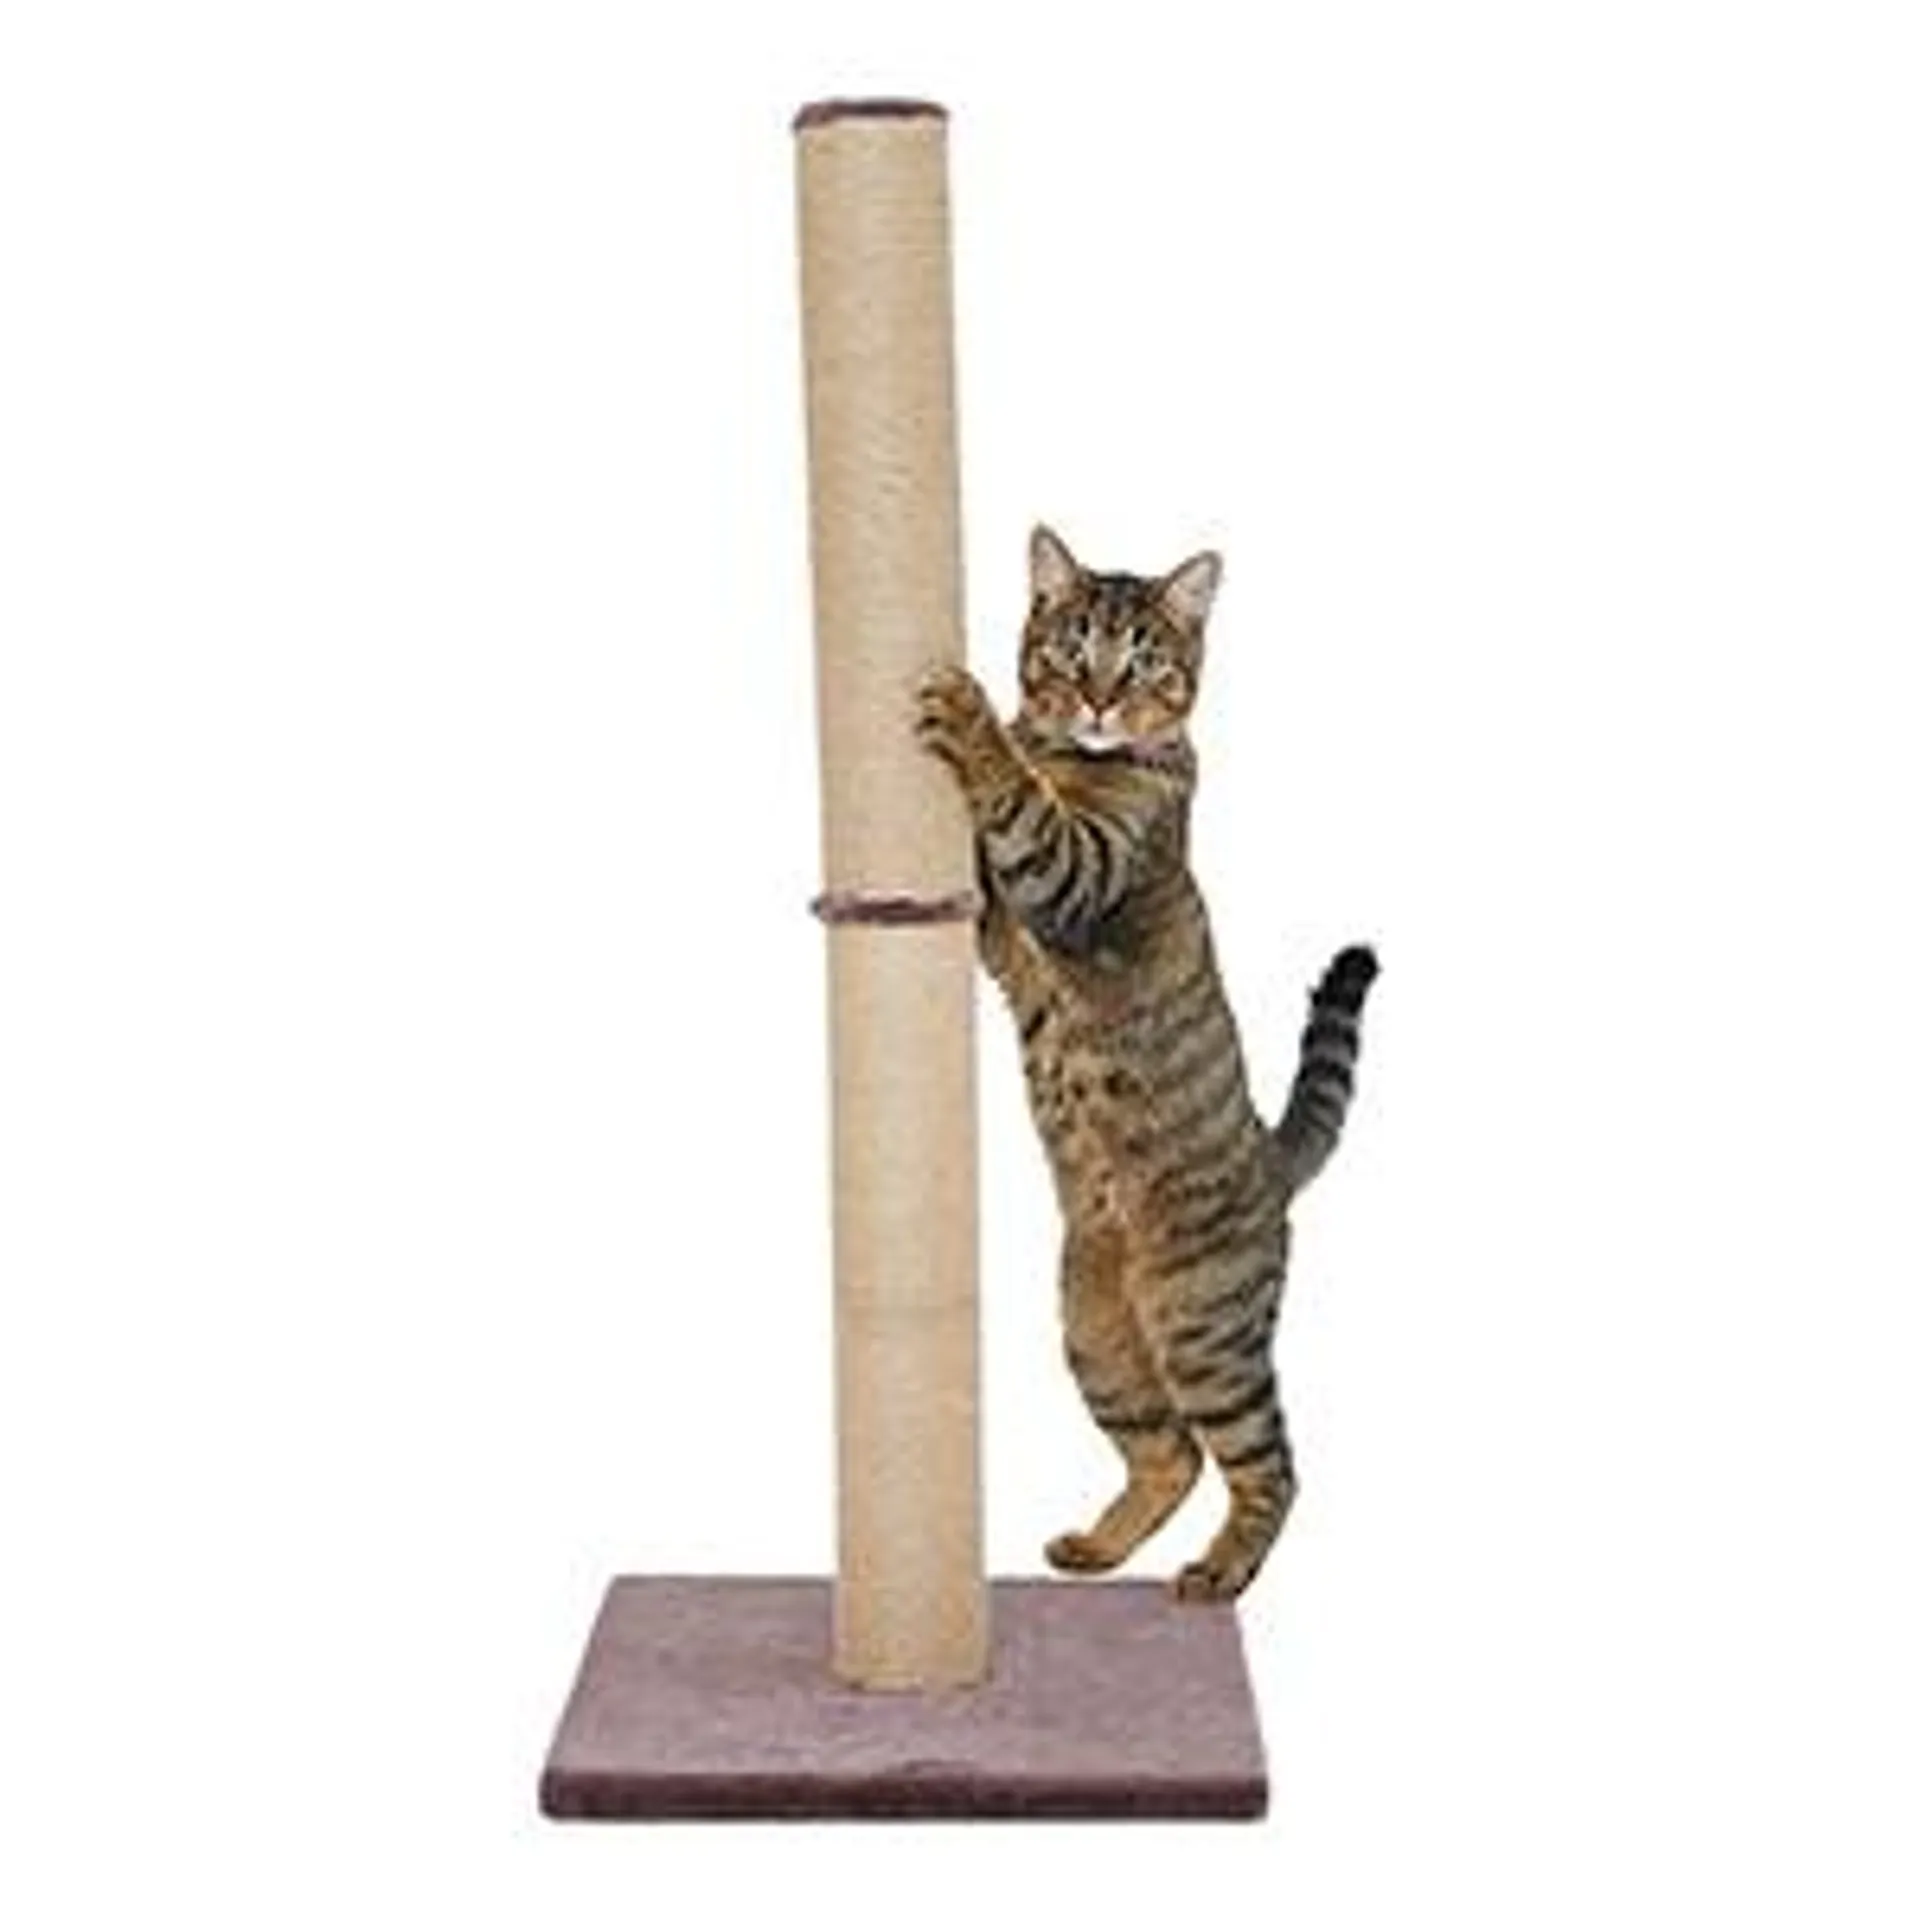 Pets at Home Thompson Tall Cat Scratch Post